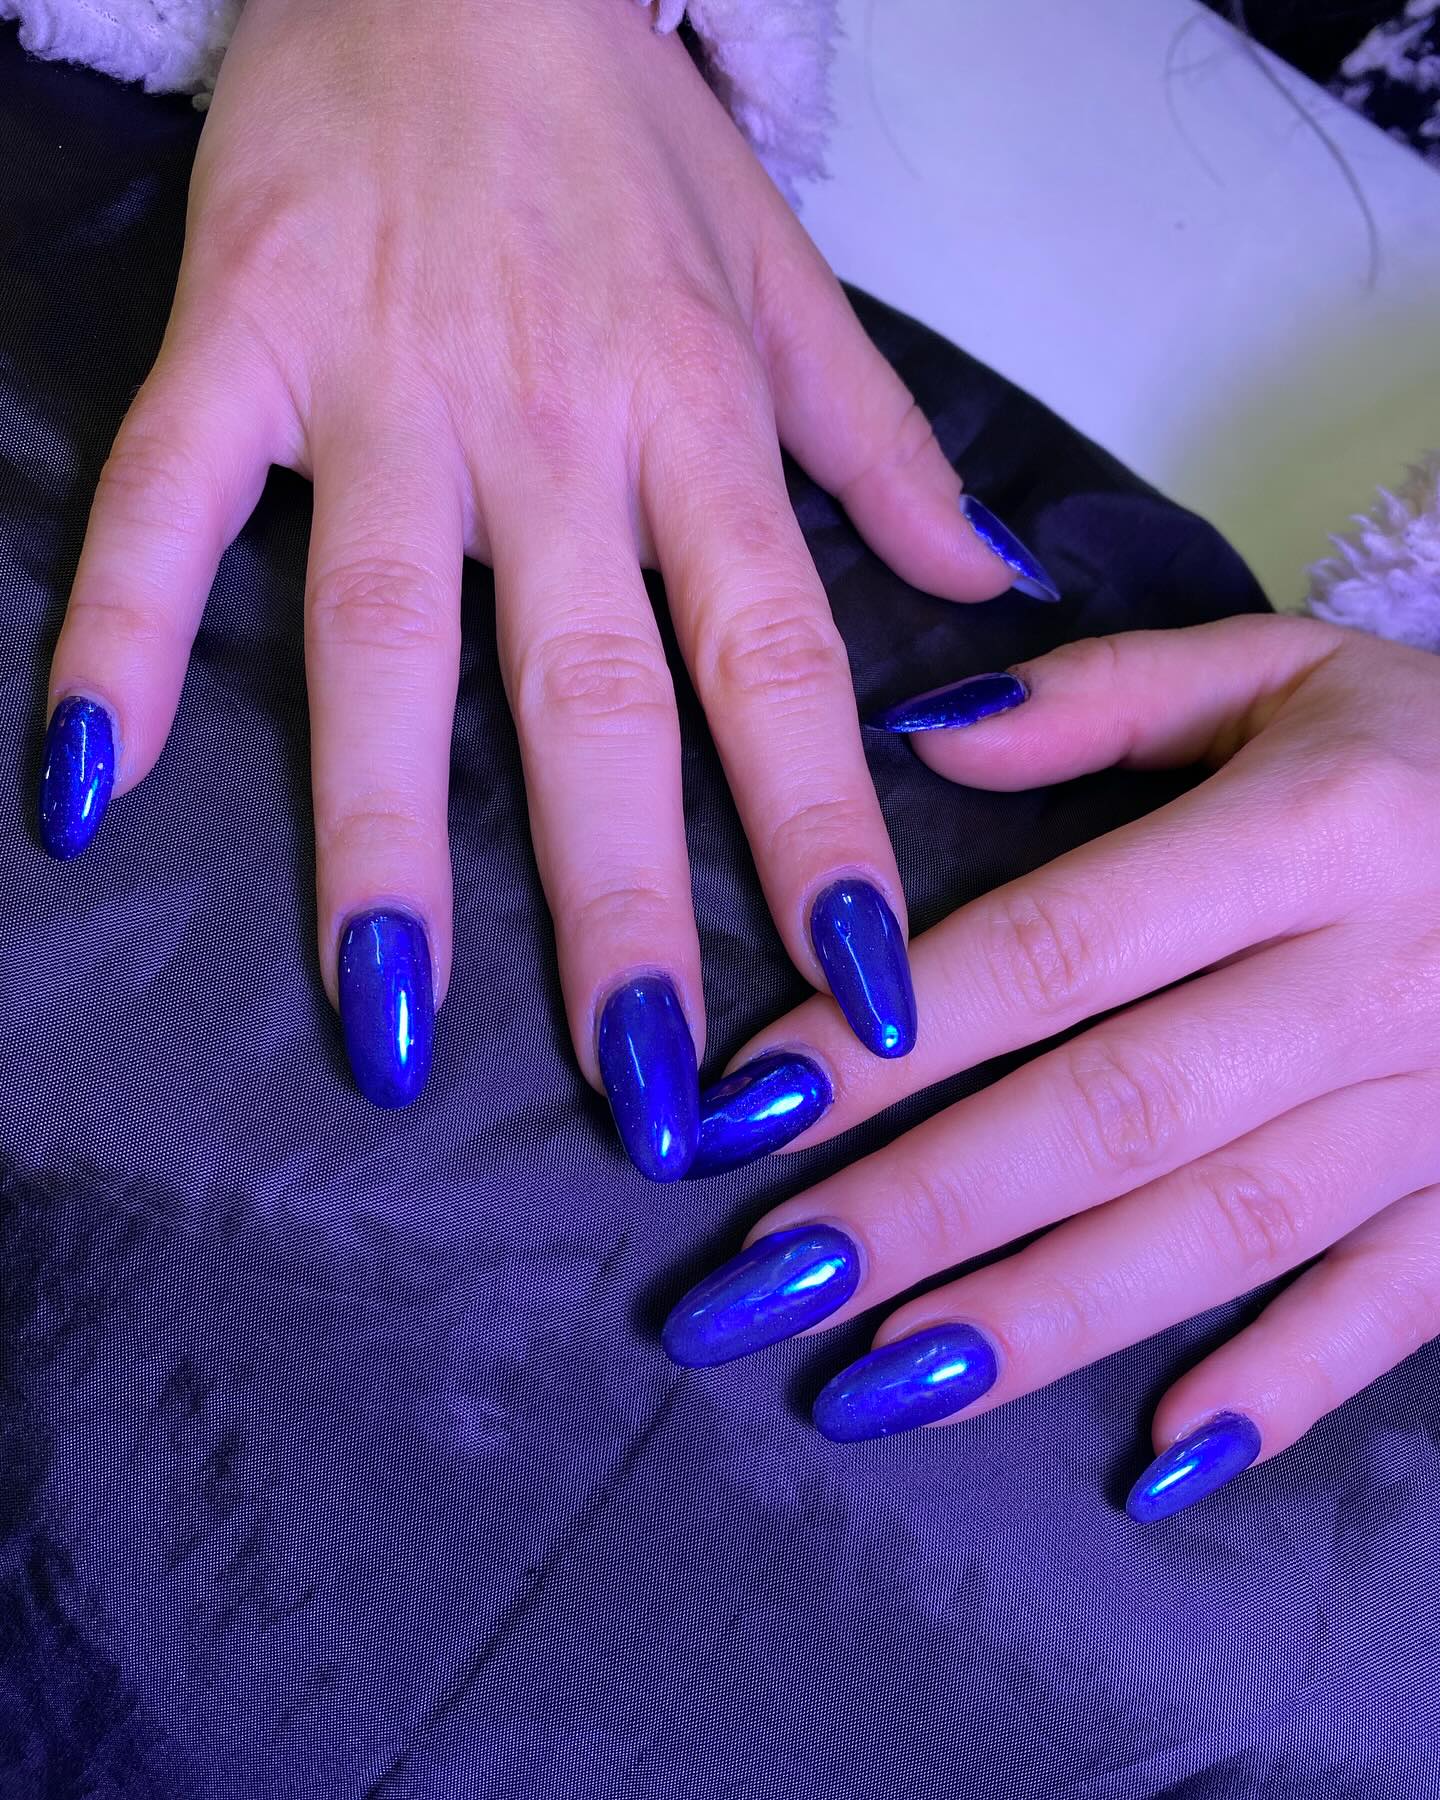 Metallic Blue Almond-Shaped Manicure Excellence